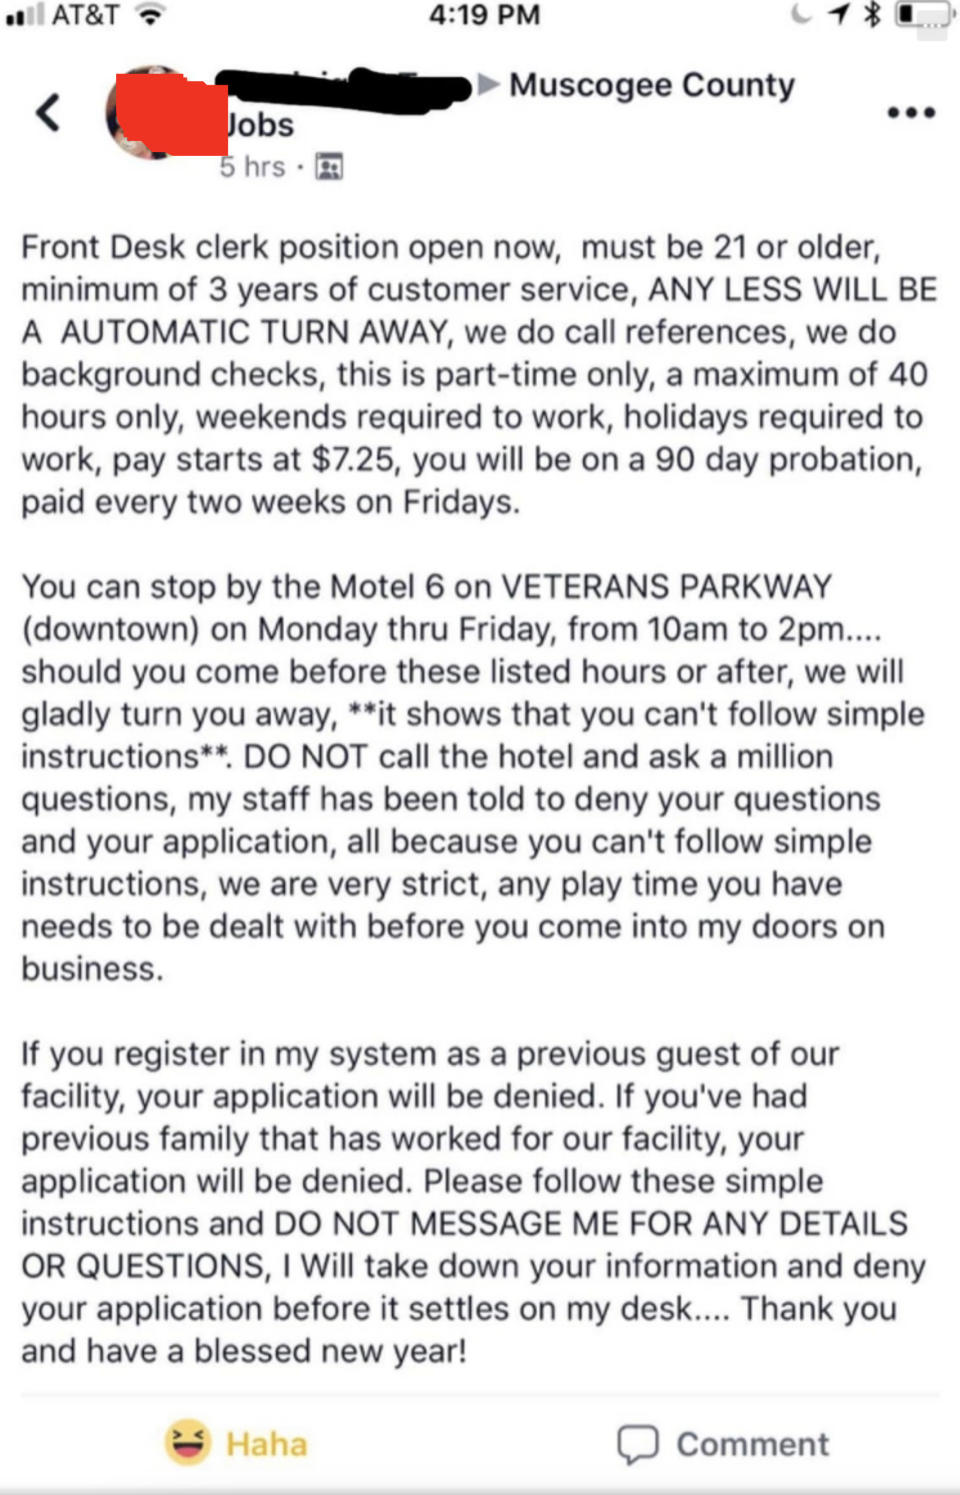 Minimum 3 years of customer service experience, "part-time" but a max of "40 hours," must work weekends and holidays, can't call with questions, can't apply if you have ever been a guest or a relative has worked for the place before